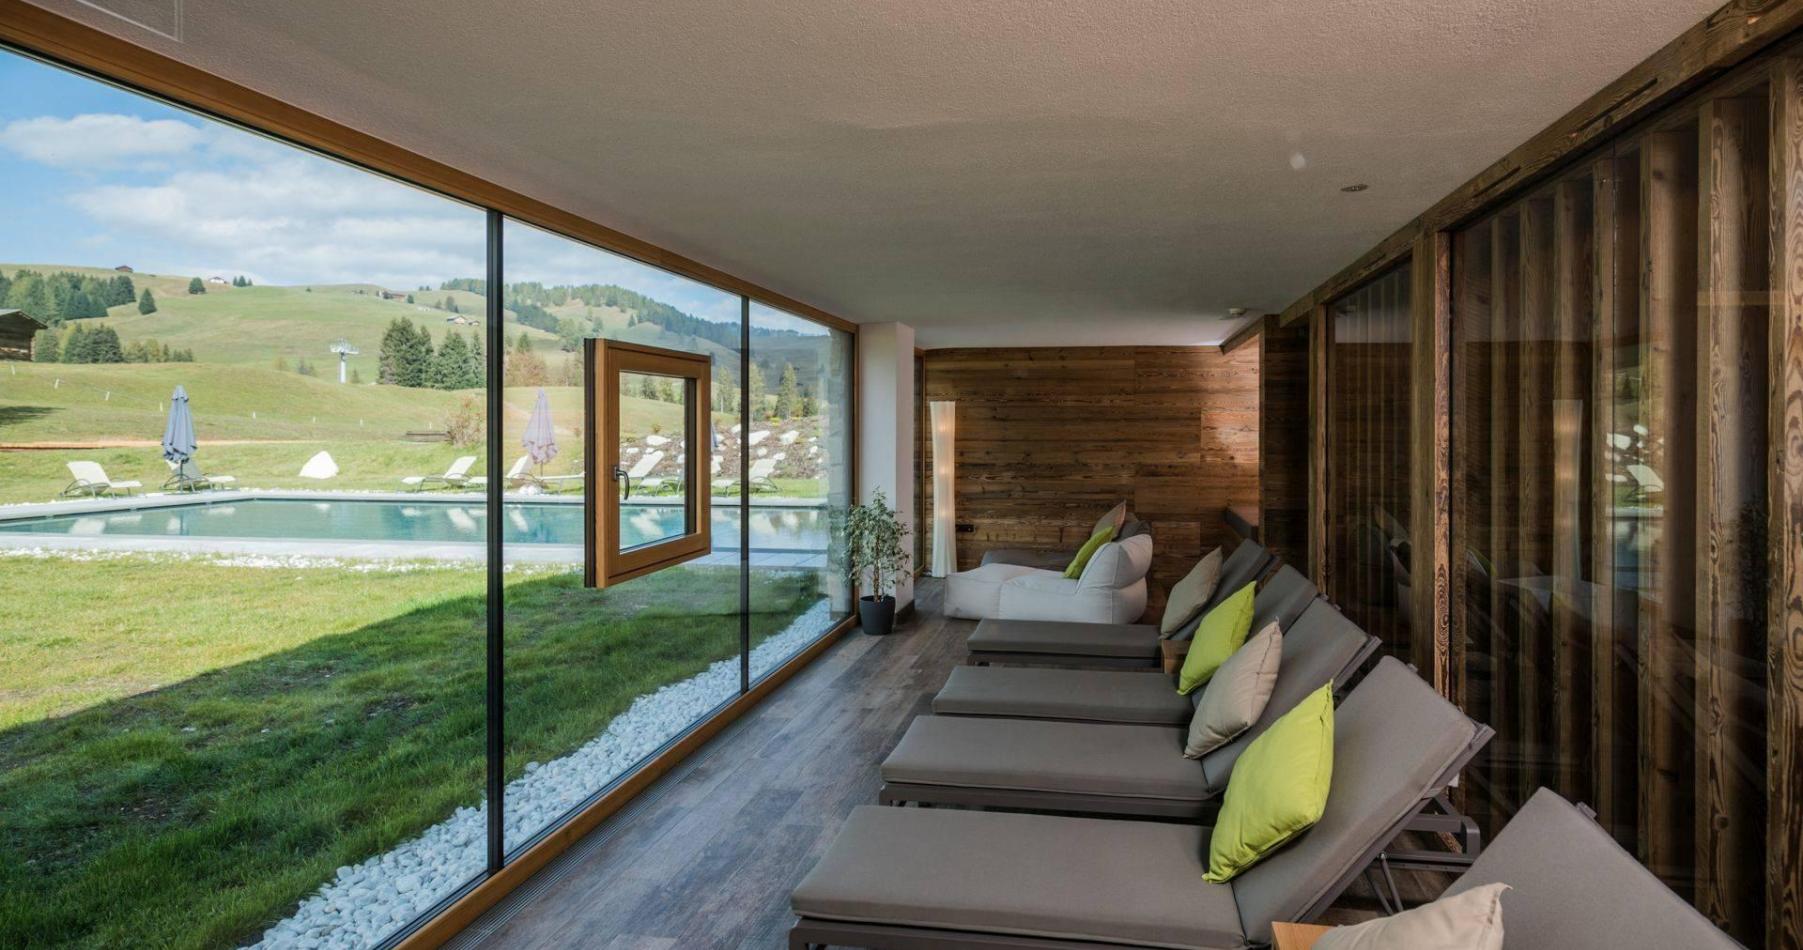 Relaxation area with a view on the outdoor pool